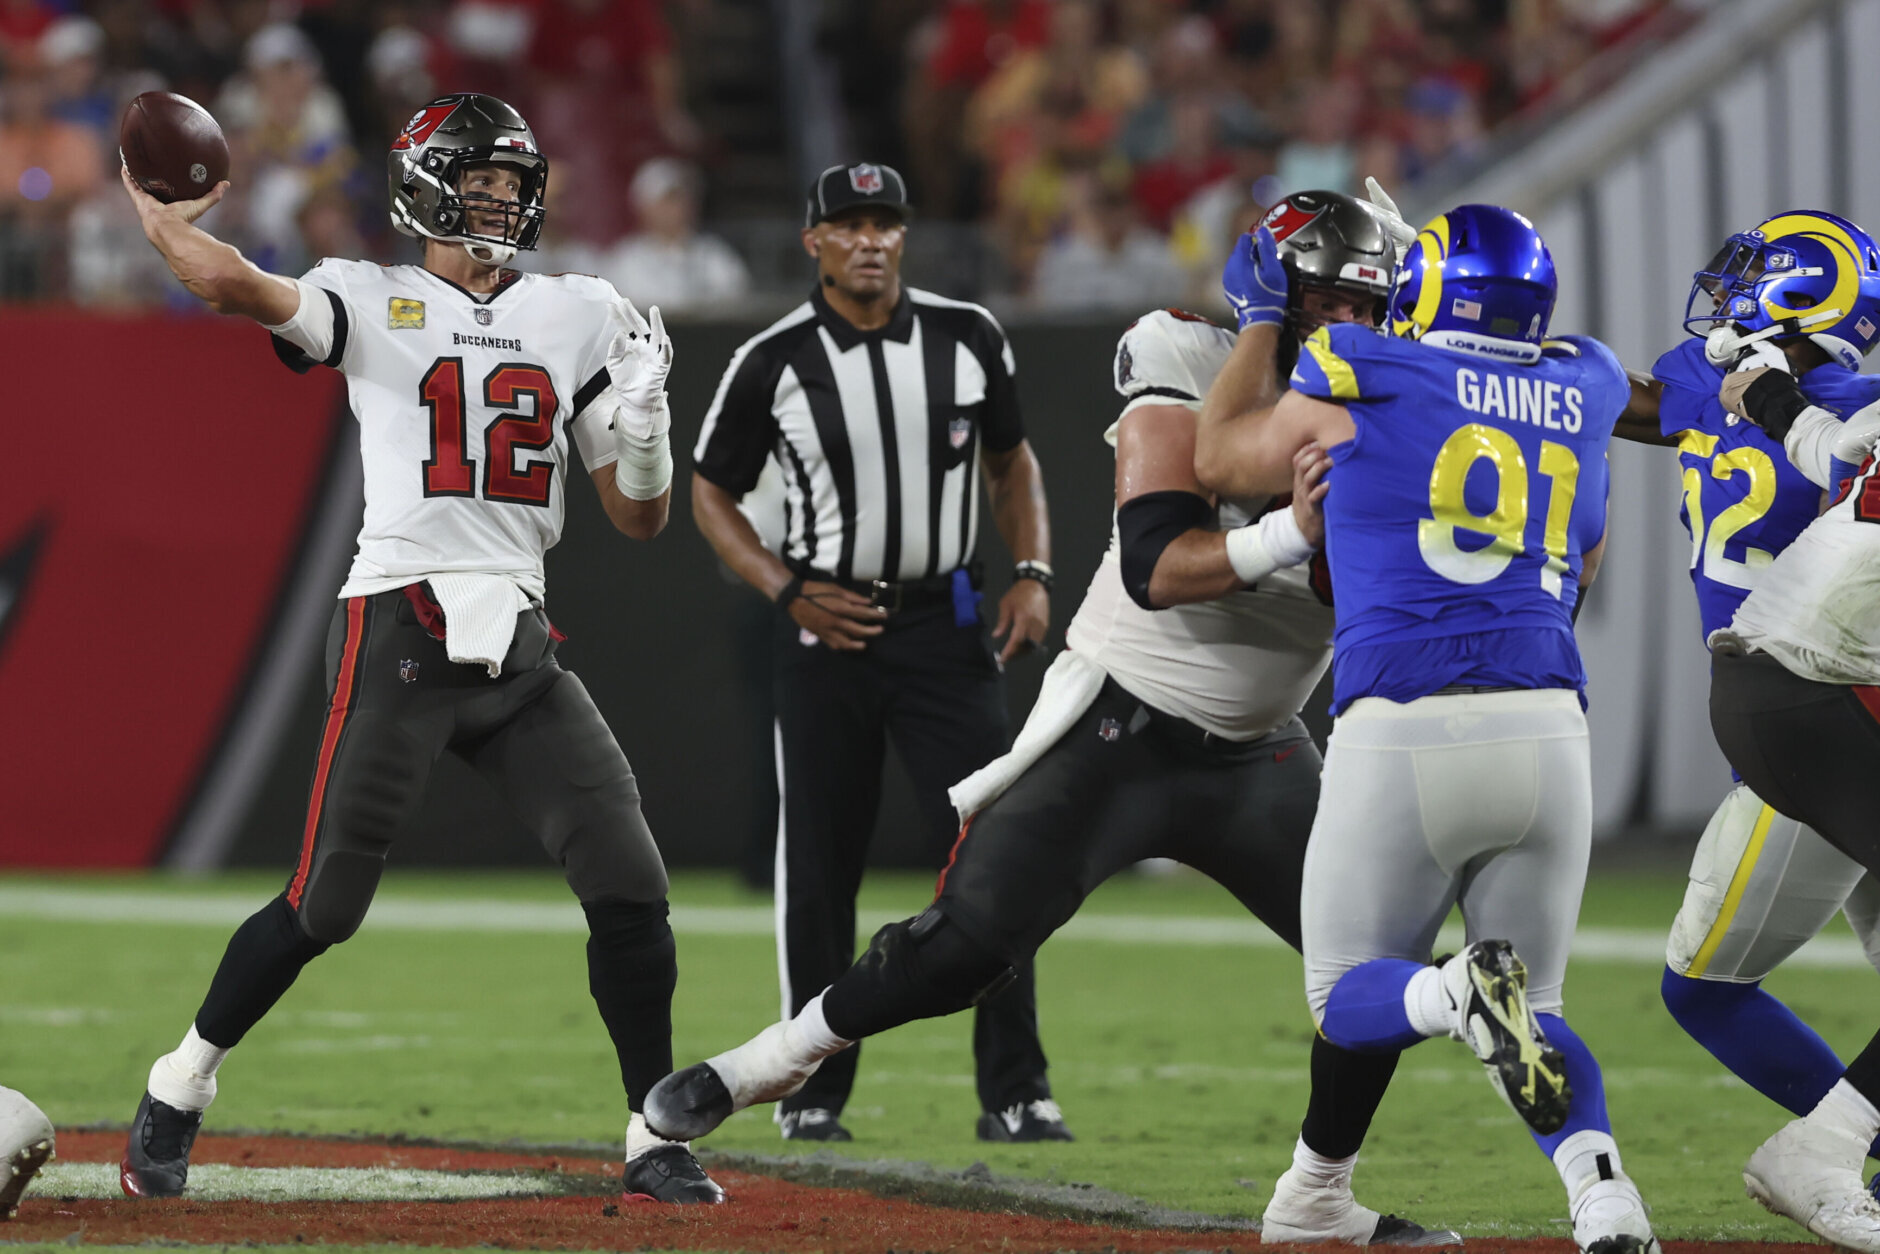 <p><b><i>Rams 13</i></b><br />
<b><i>Bucs 16</i></b></p>
<p>An NFL-record 55 game-winning touchdown drives and an unfathomable (<a href="https://profootballtalk.nbcsports.com/2022/11/03/tom-brady-doesnt-care-about-the-ball-that-will-mark-his-100000th-passing-yard/" target="_blank" rel="noopener">and, apparently, unwanted</a>) 100,000 passing yards. Tom Brady ain&#8217;t human.</p>
<p>The Rams&#8217; first loss to Brady&#8217;s Bucs dropped them to 3-5 may be the beginning of the end of their season. I thought the Super Bowl loser was supposed to have the hangover?</p>
